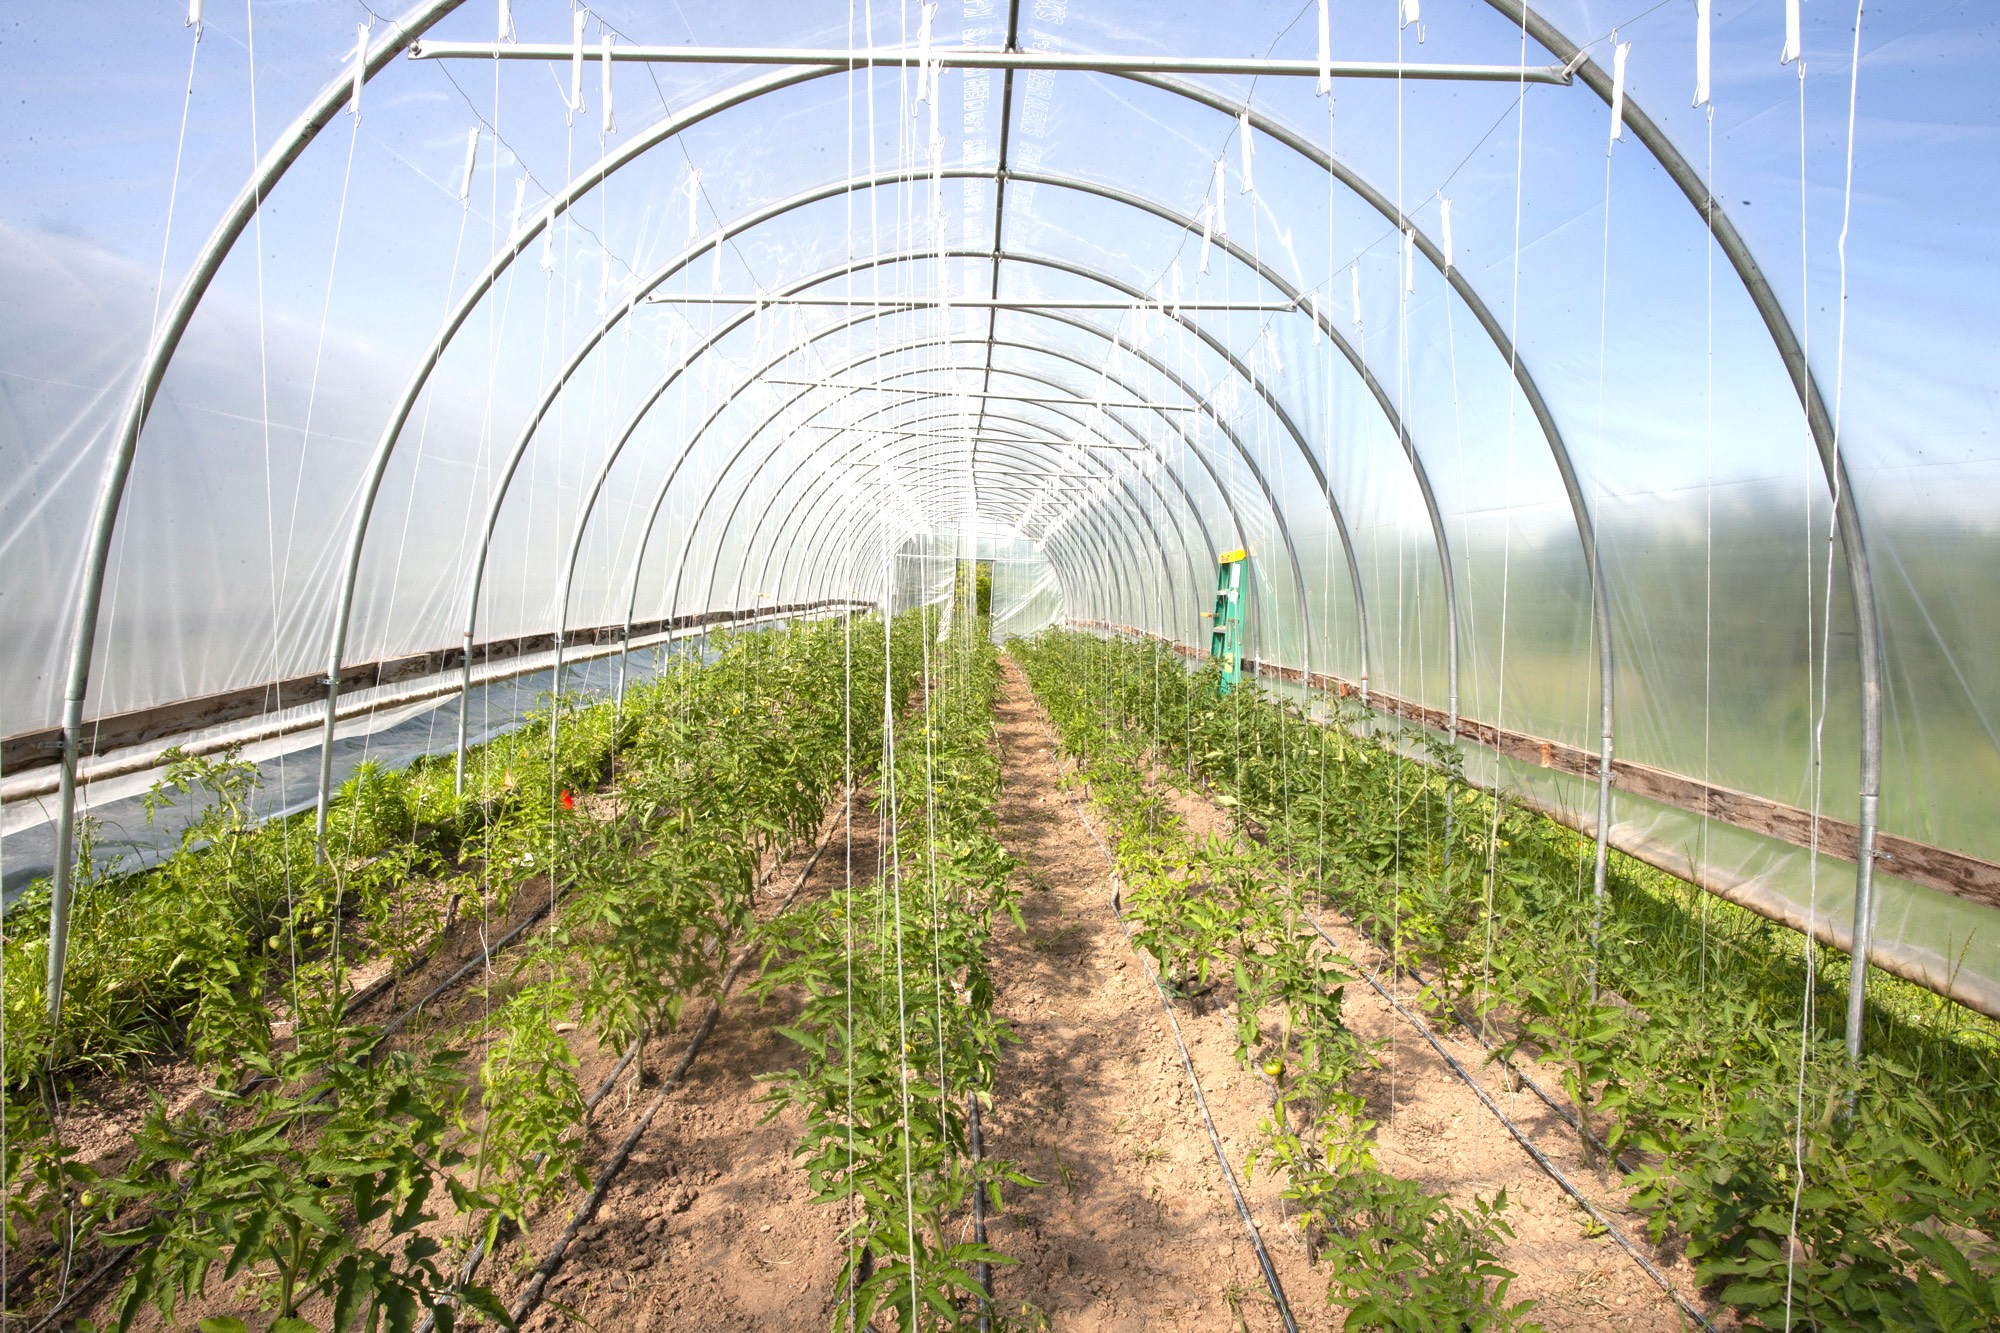 A photo of tomatoes growing in a greenhouse at Avrom Farm